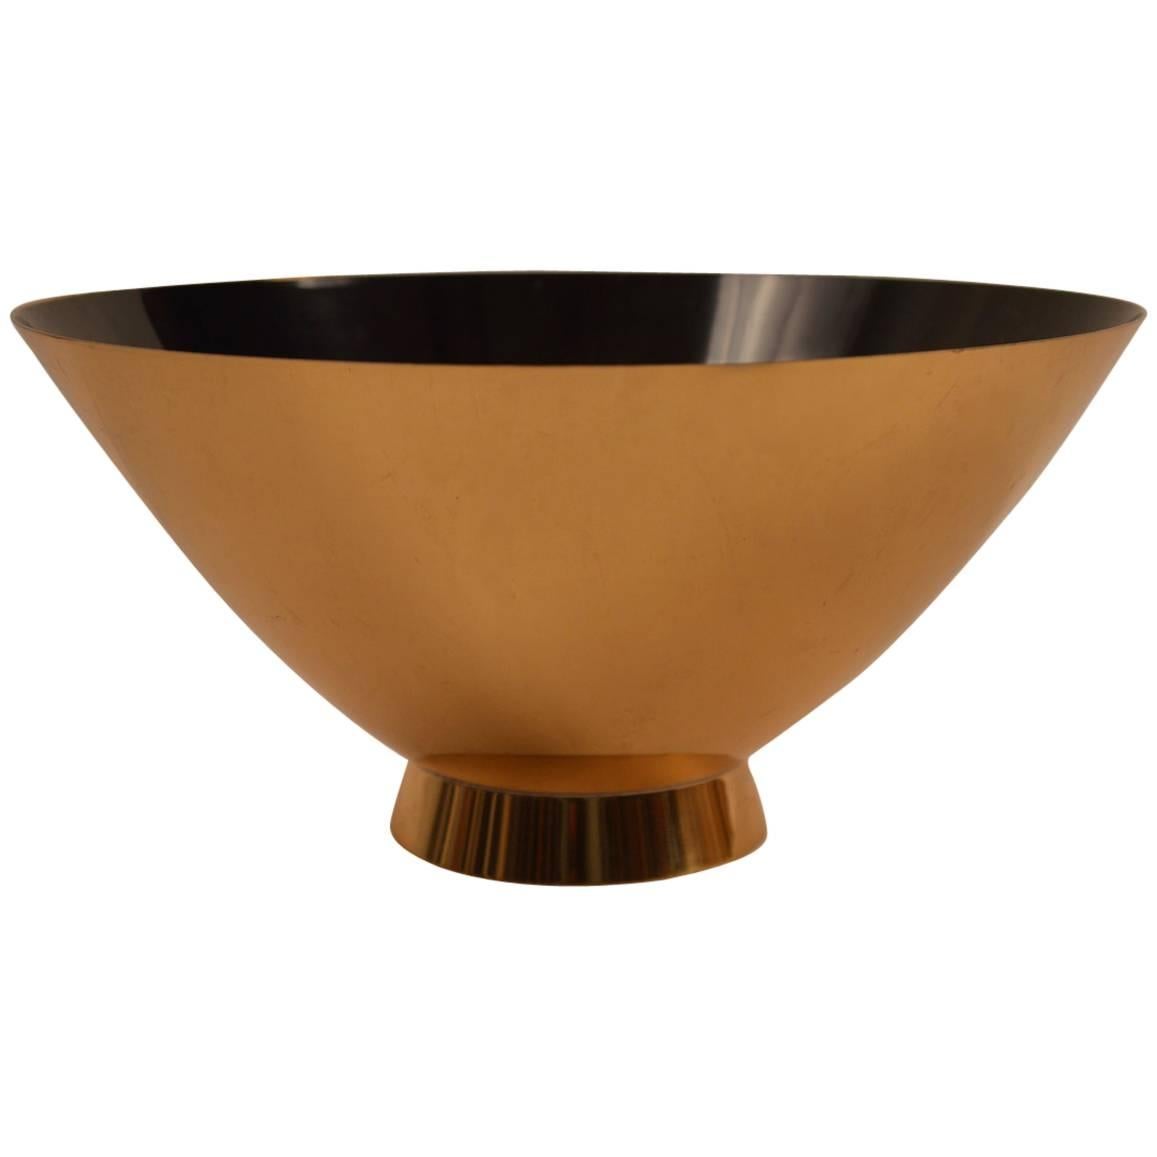 Modernist Bowl by Donald Colflesh for Gorham